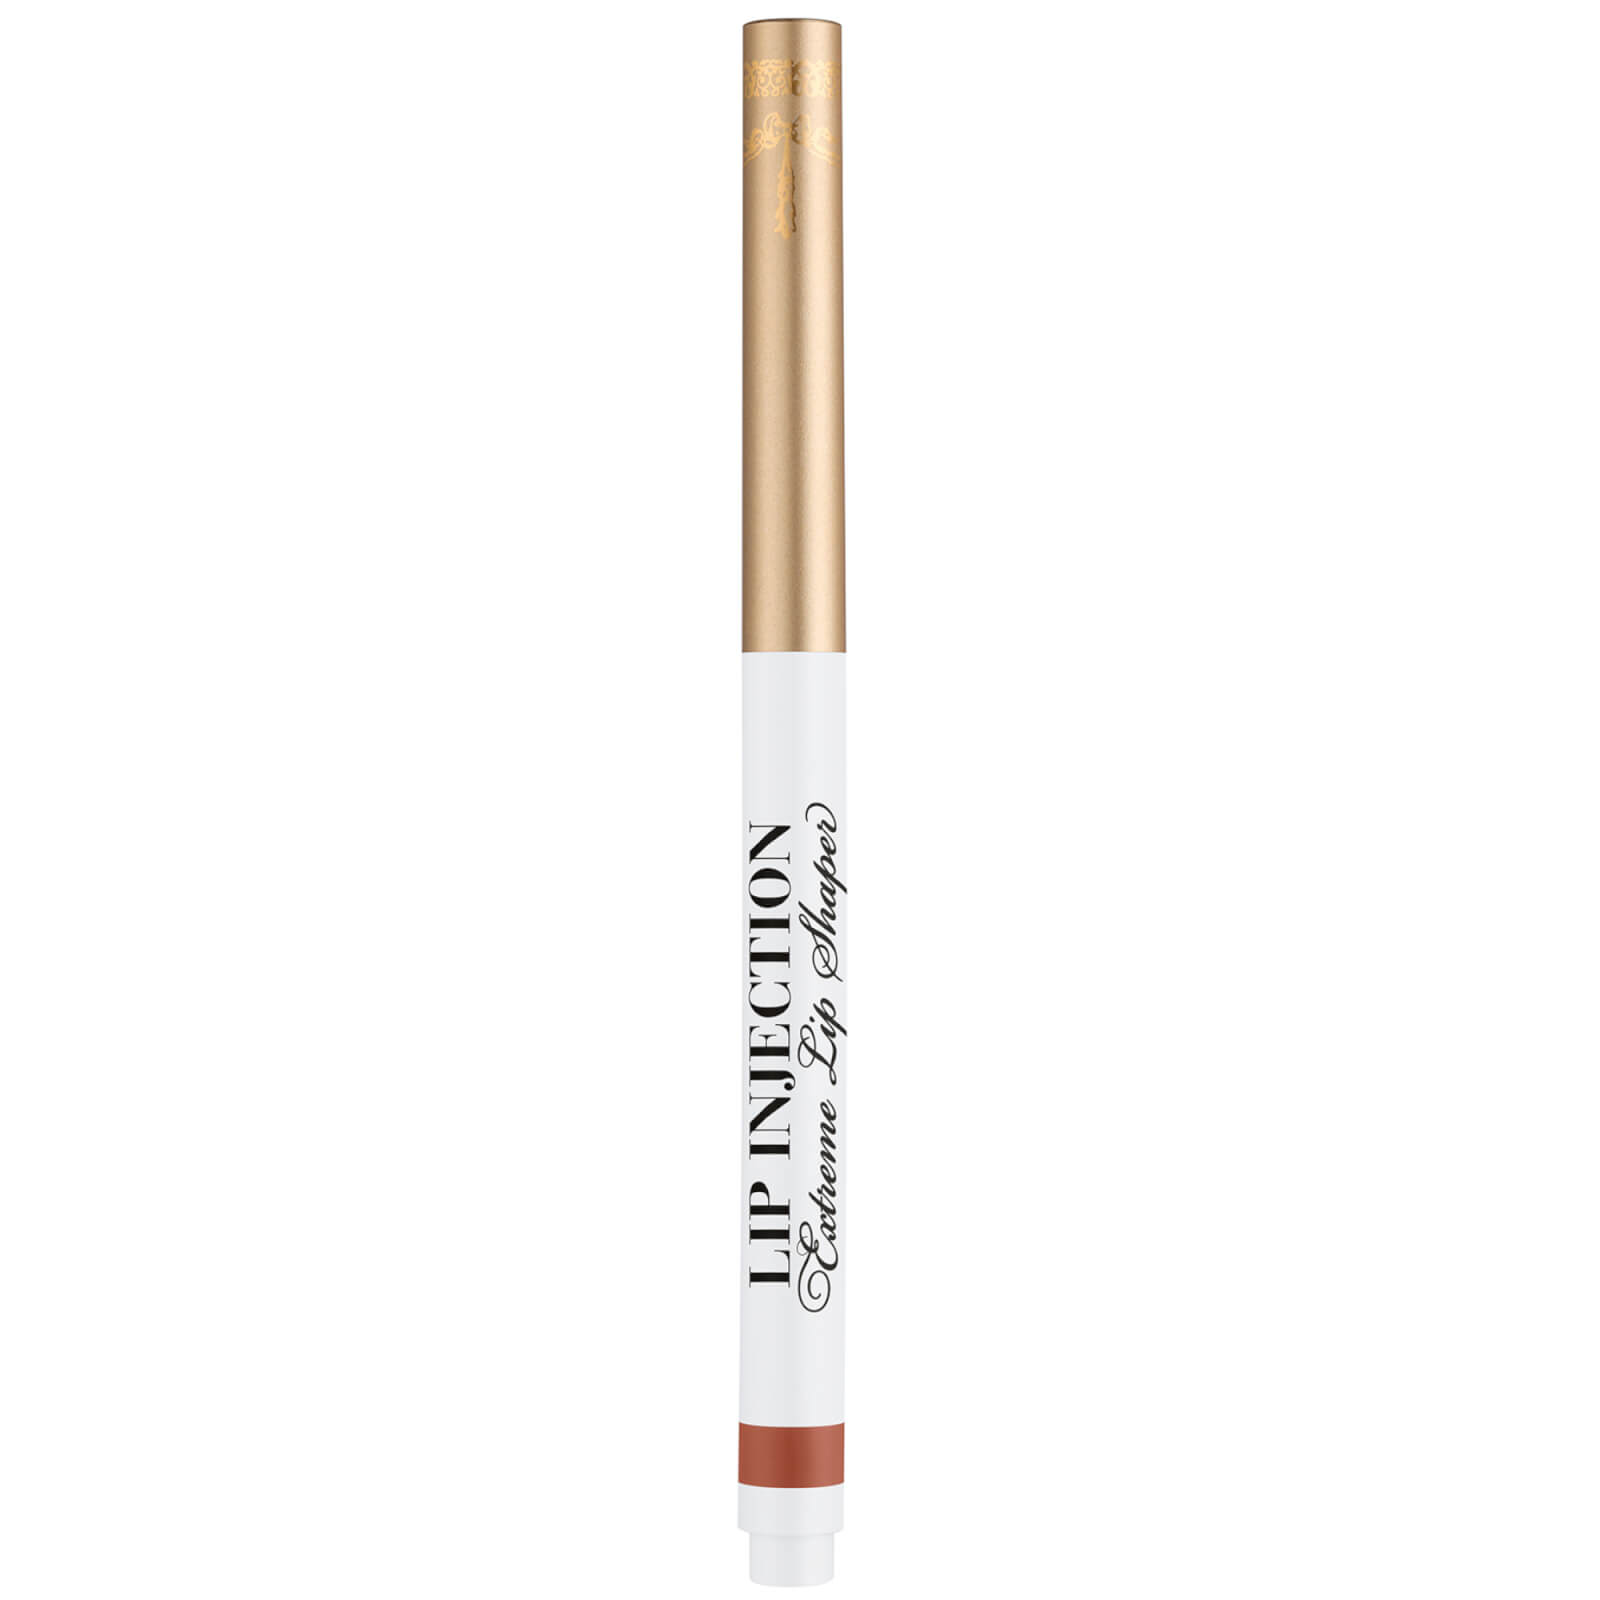 Image of Too Faced Lip Injection Extreme Lip Shaper 0.23g (Various Shades) - Cinnamon Swell